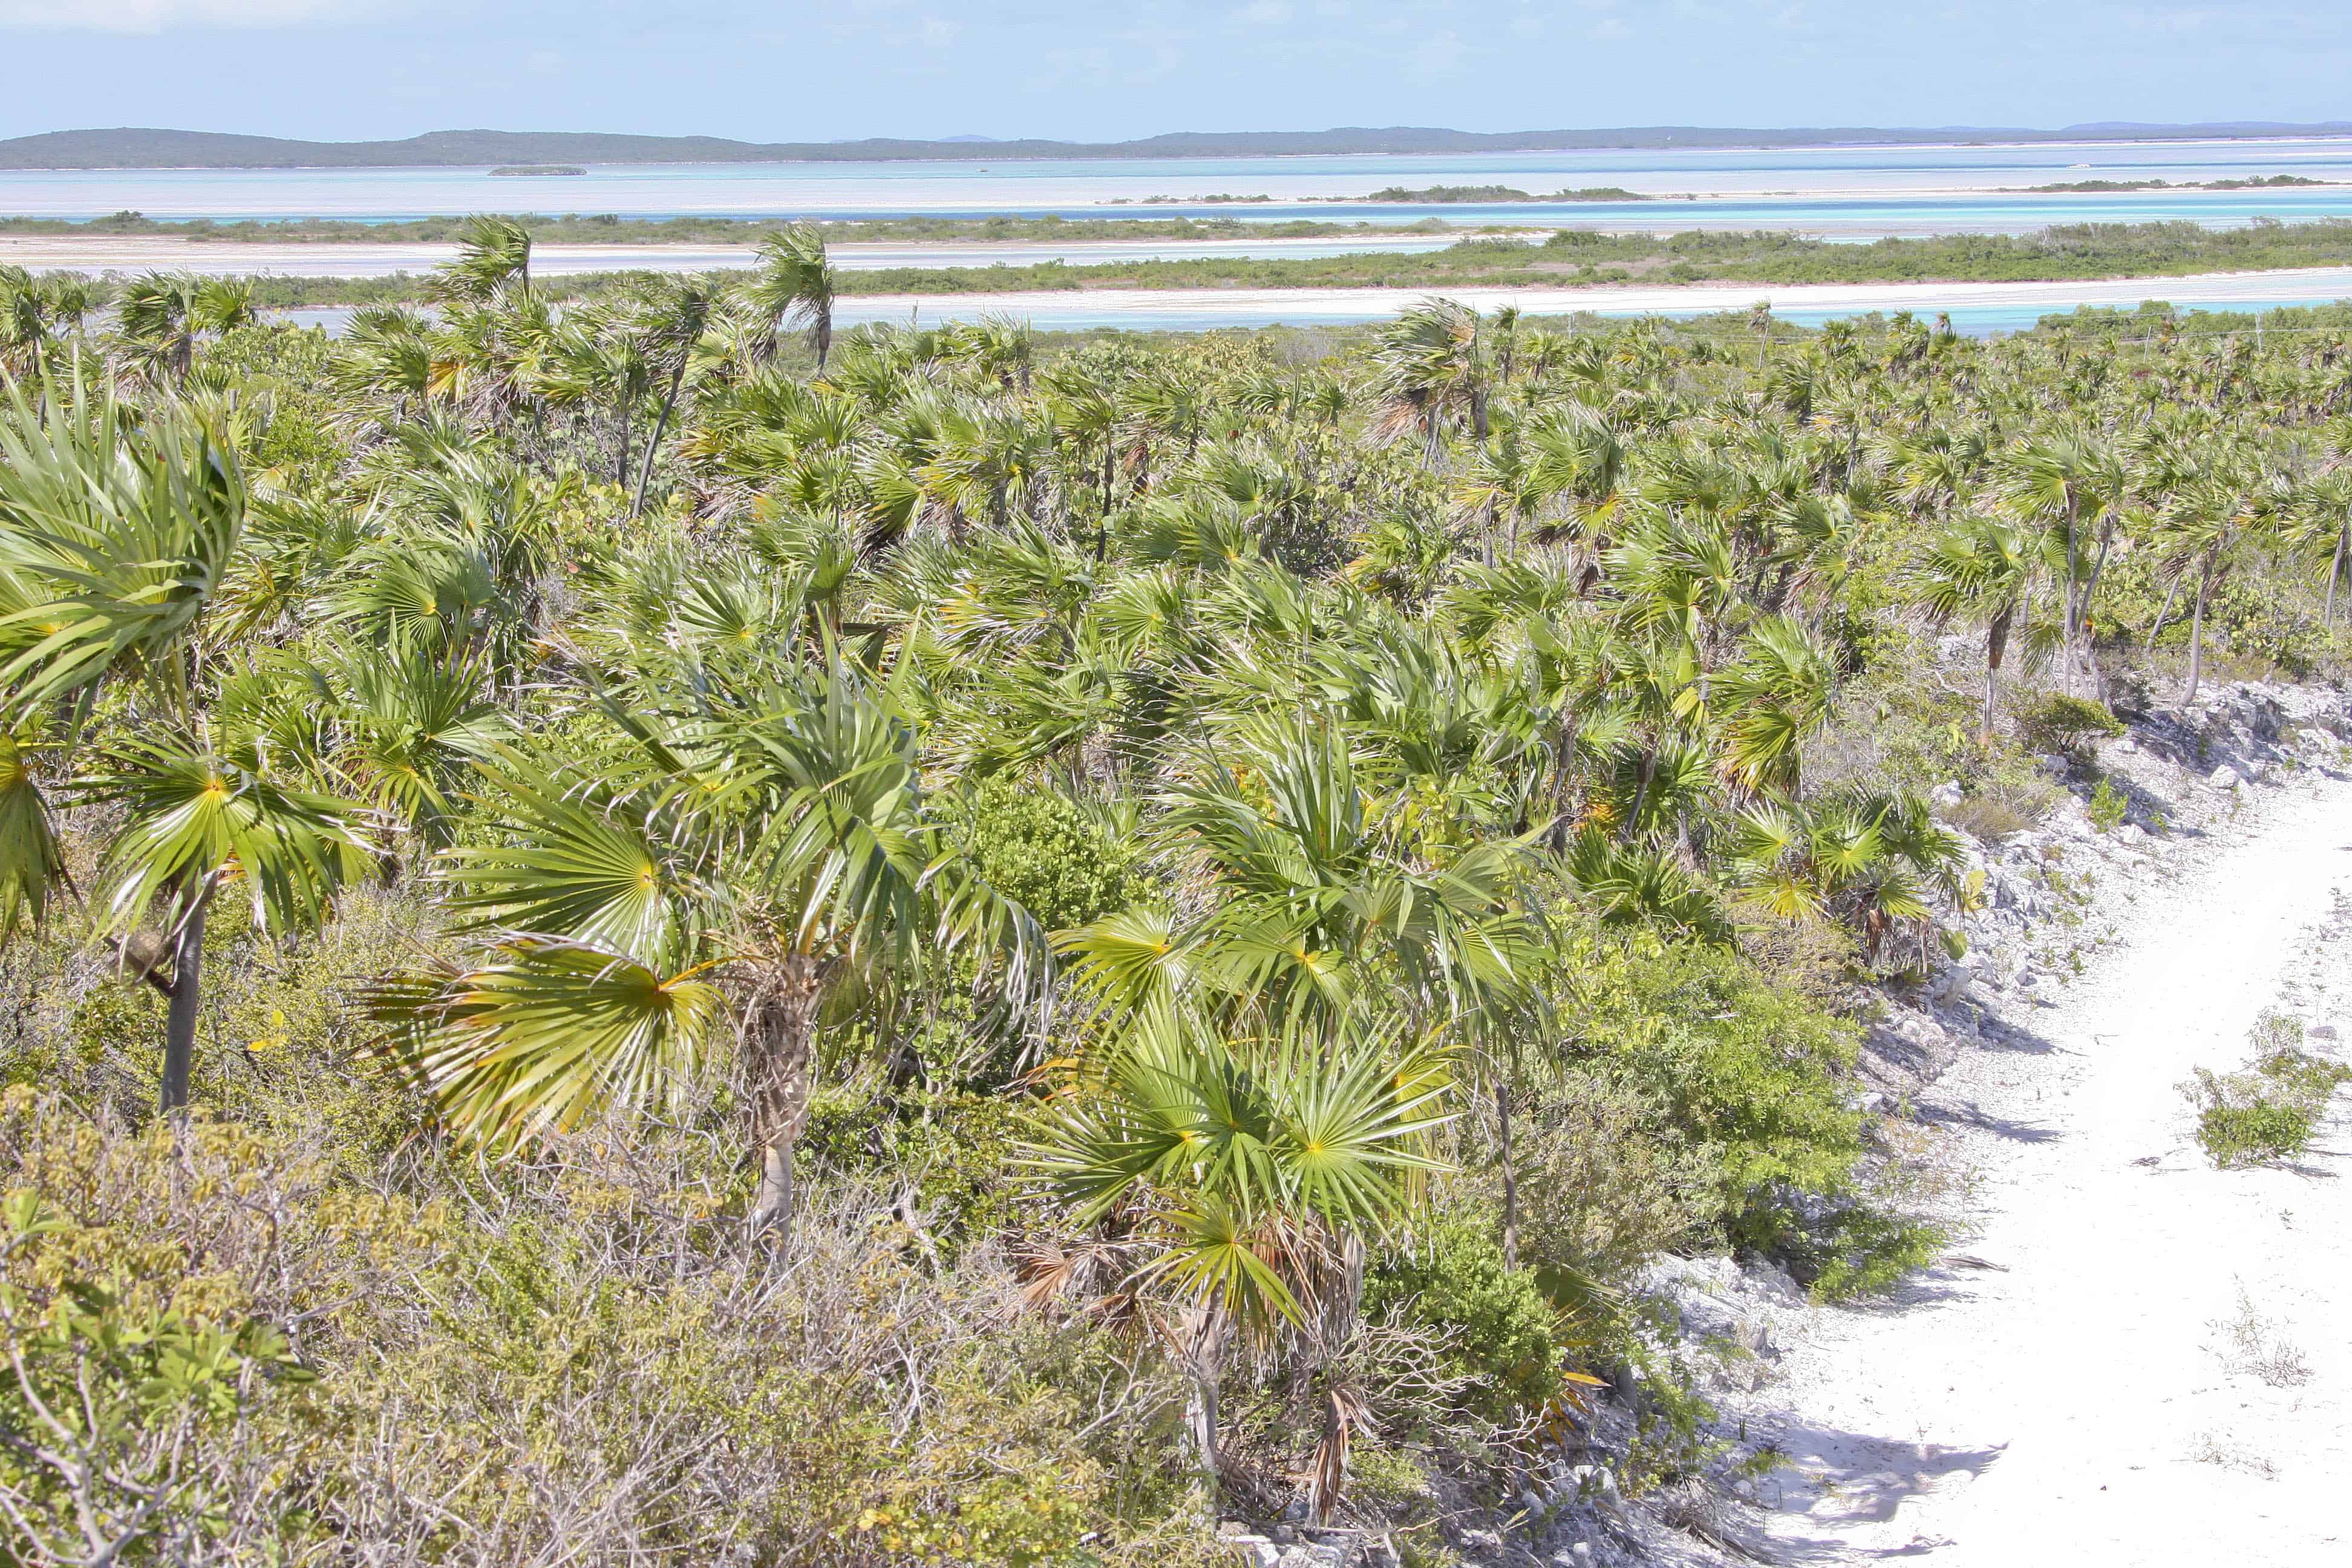 South and East Caicos: beaches, inlets, islands and scrub with native palms, which are traditionally used in basket-making. (Unlike these, the tall coconut palms are introduced.) Copyright: Dr Mike Pienkowski